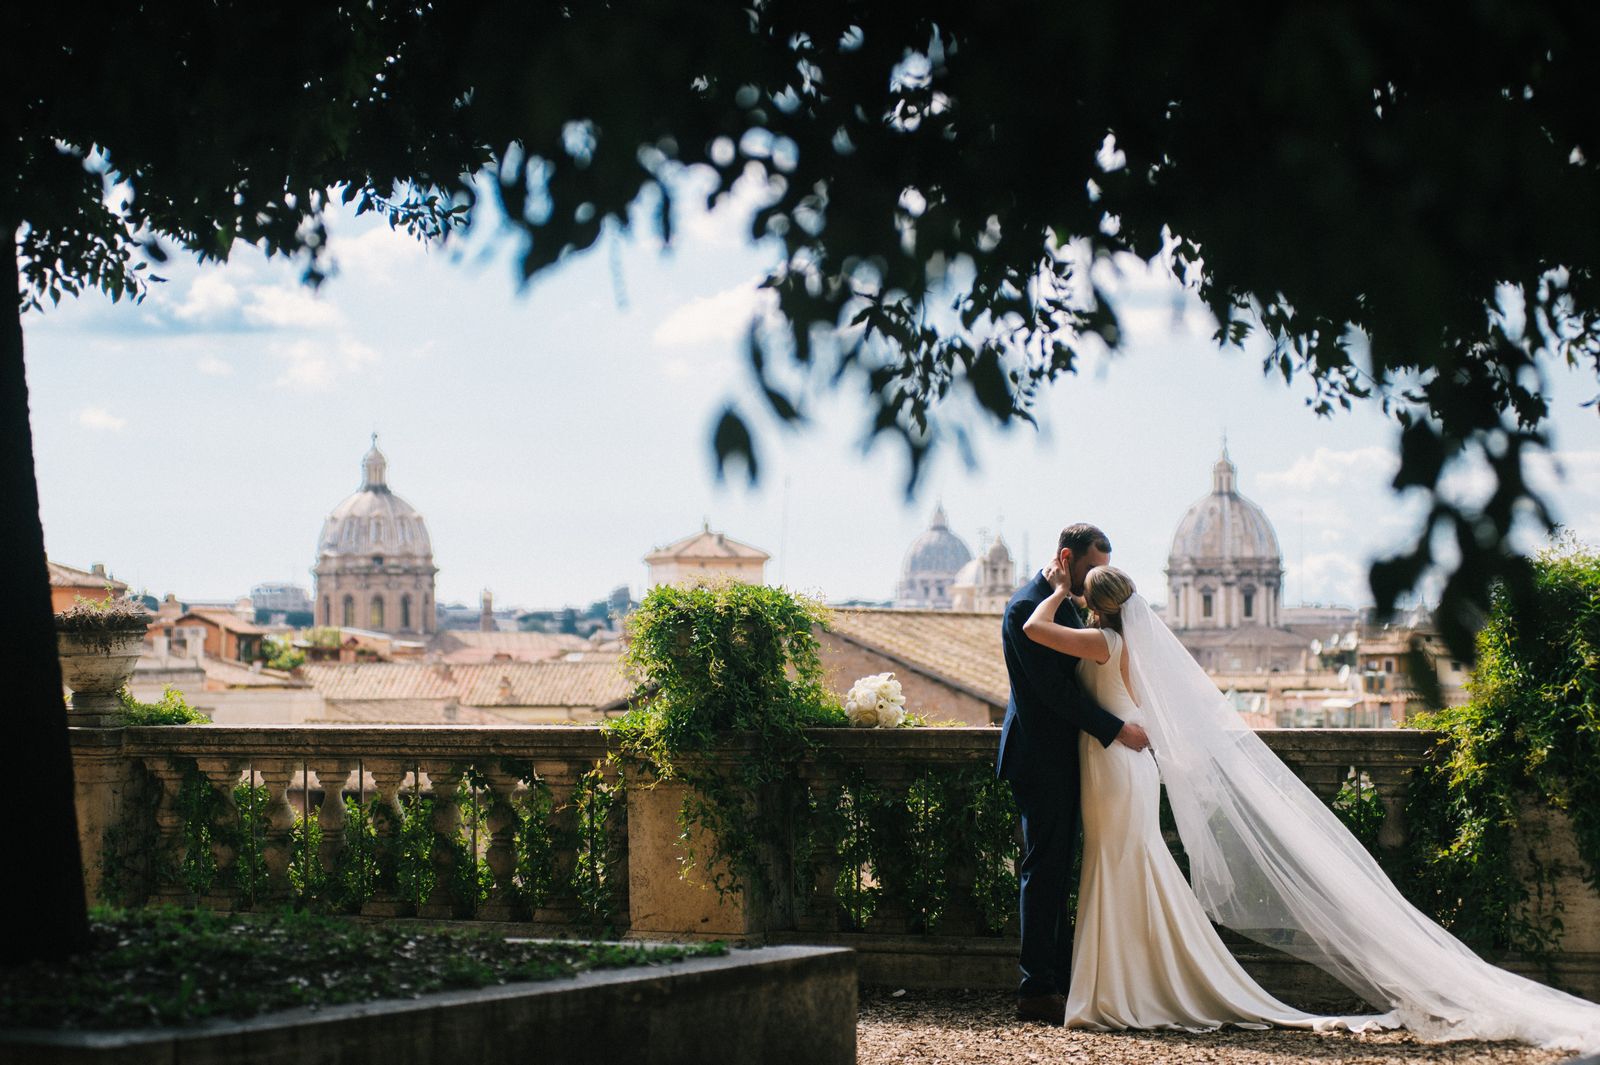 Wedding planners in Italy